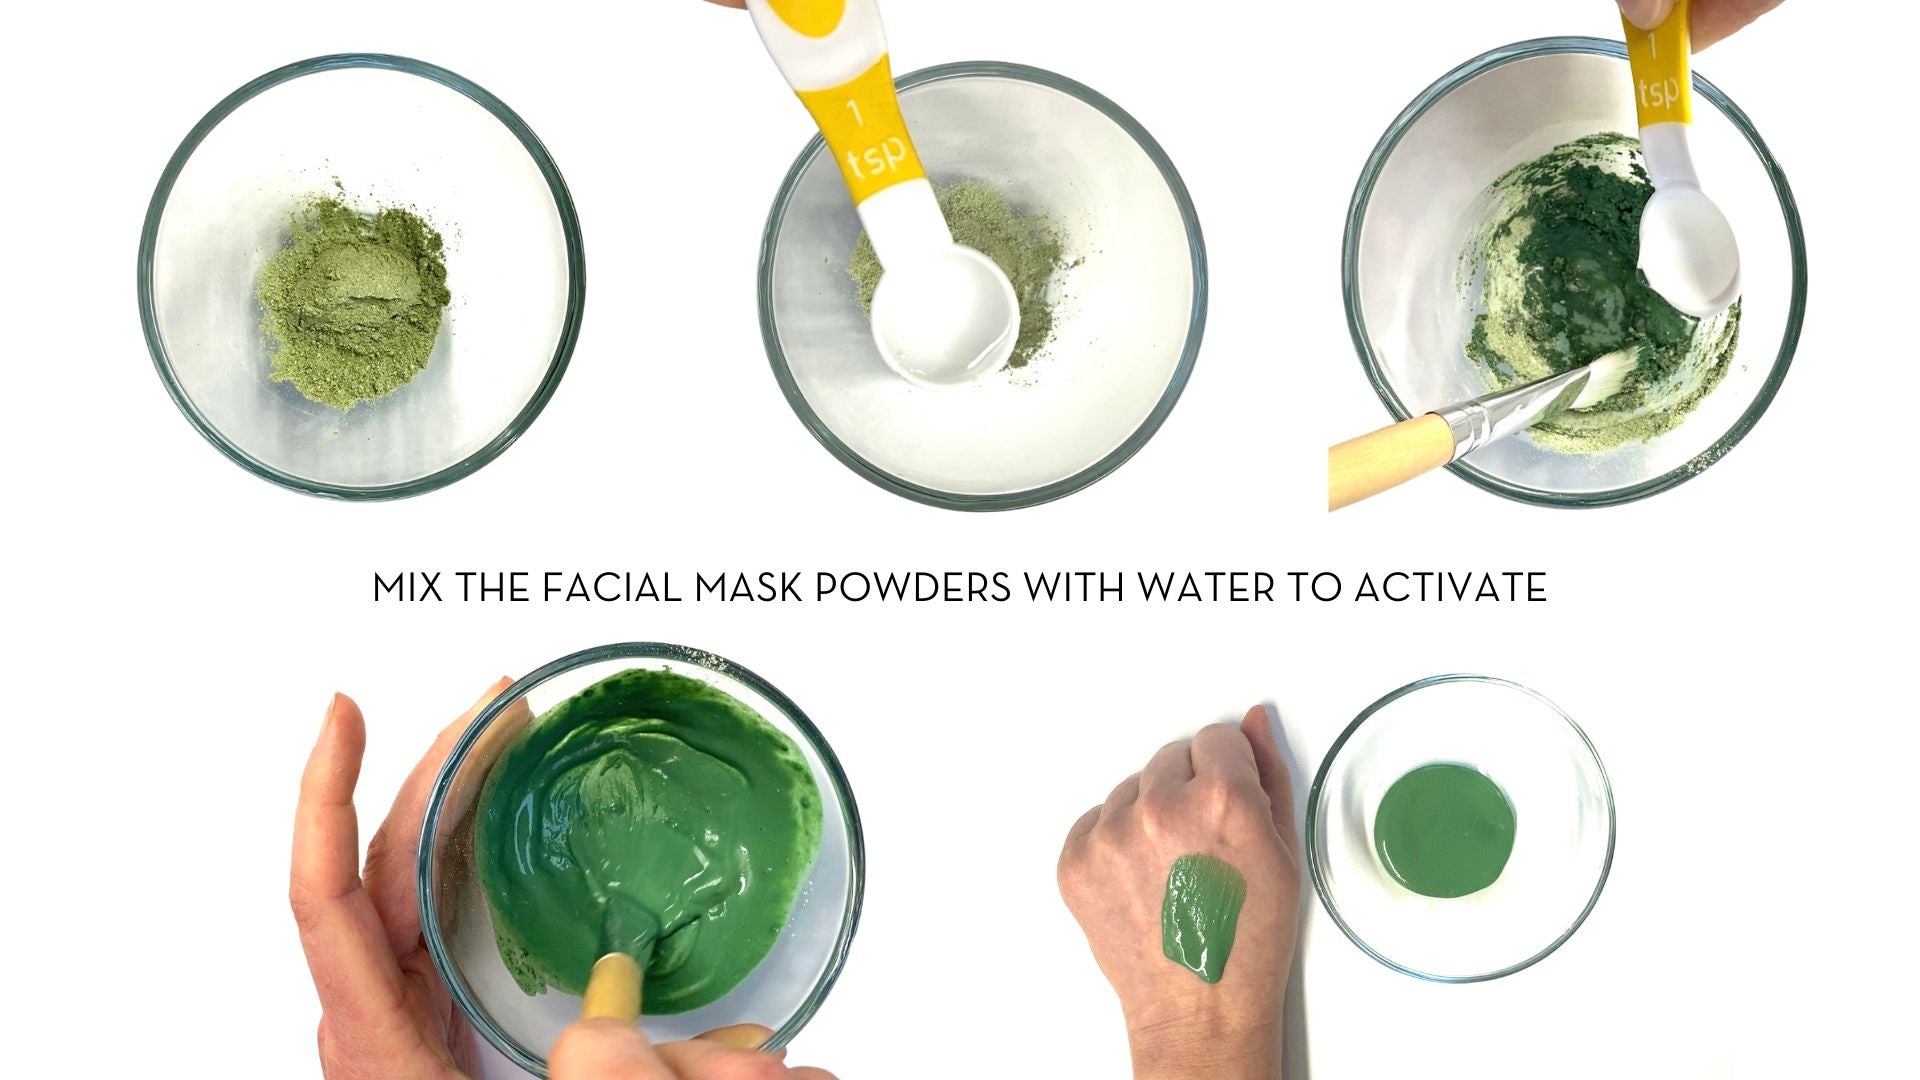 How to mix facial mask powders